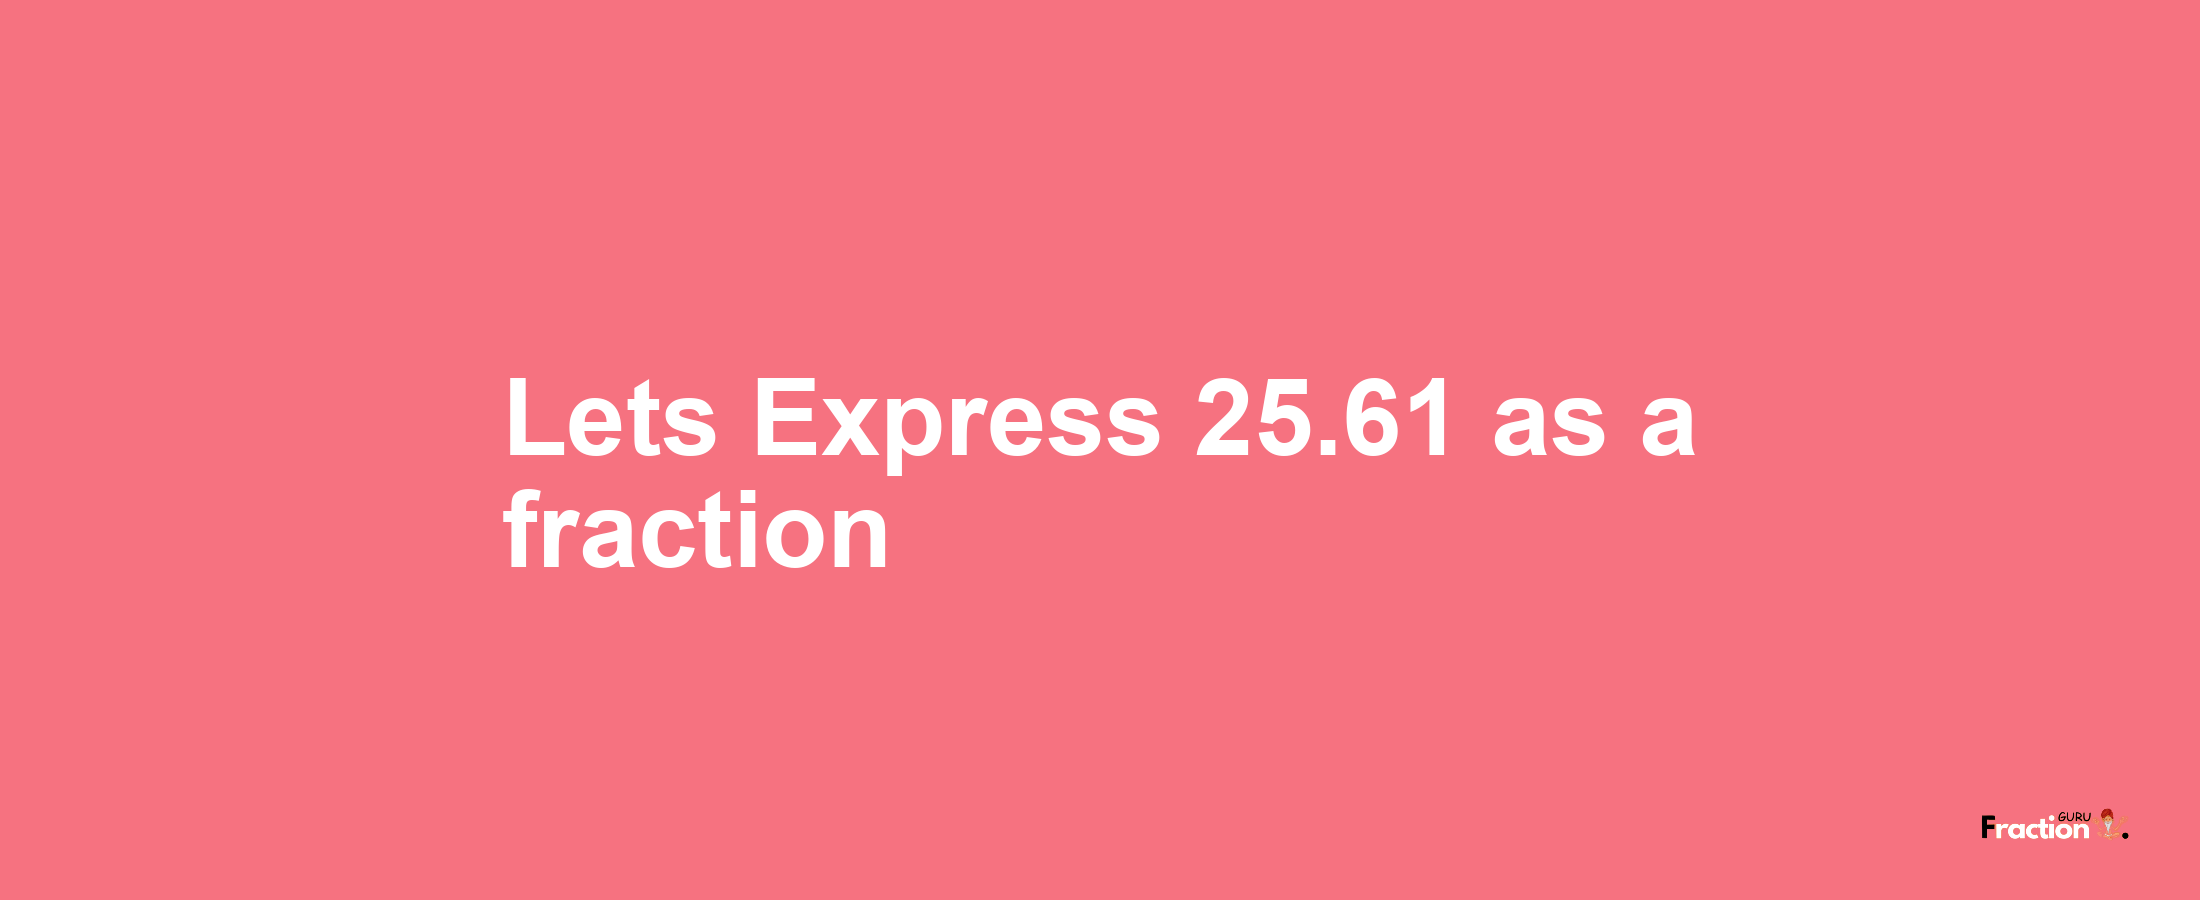 Lets Express 25.61 as afraction